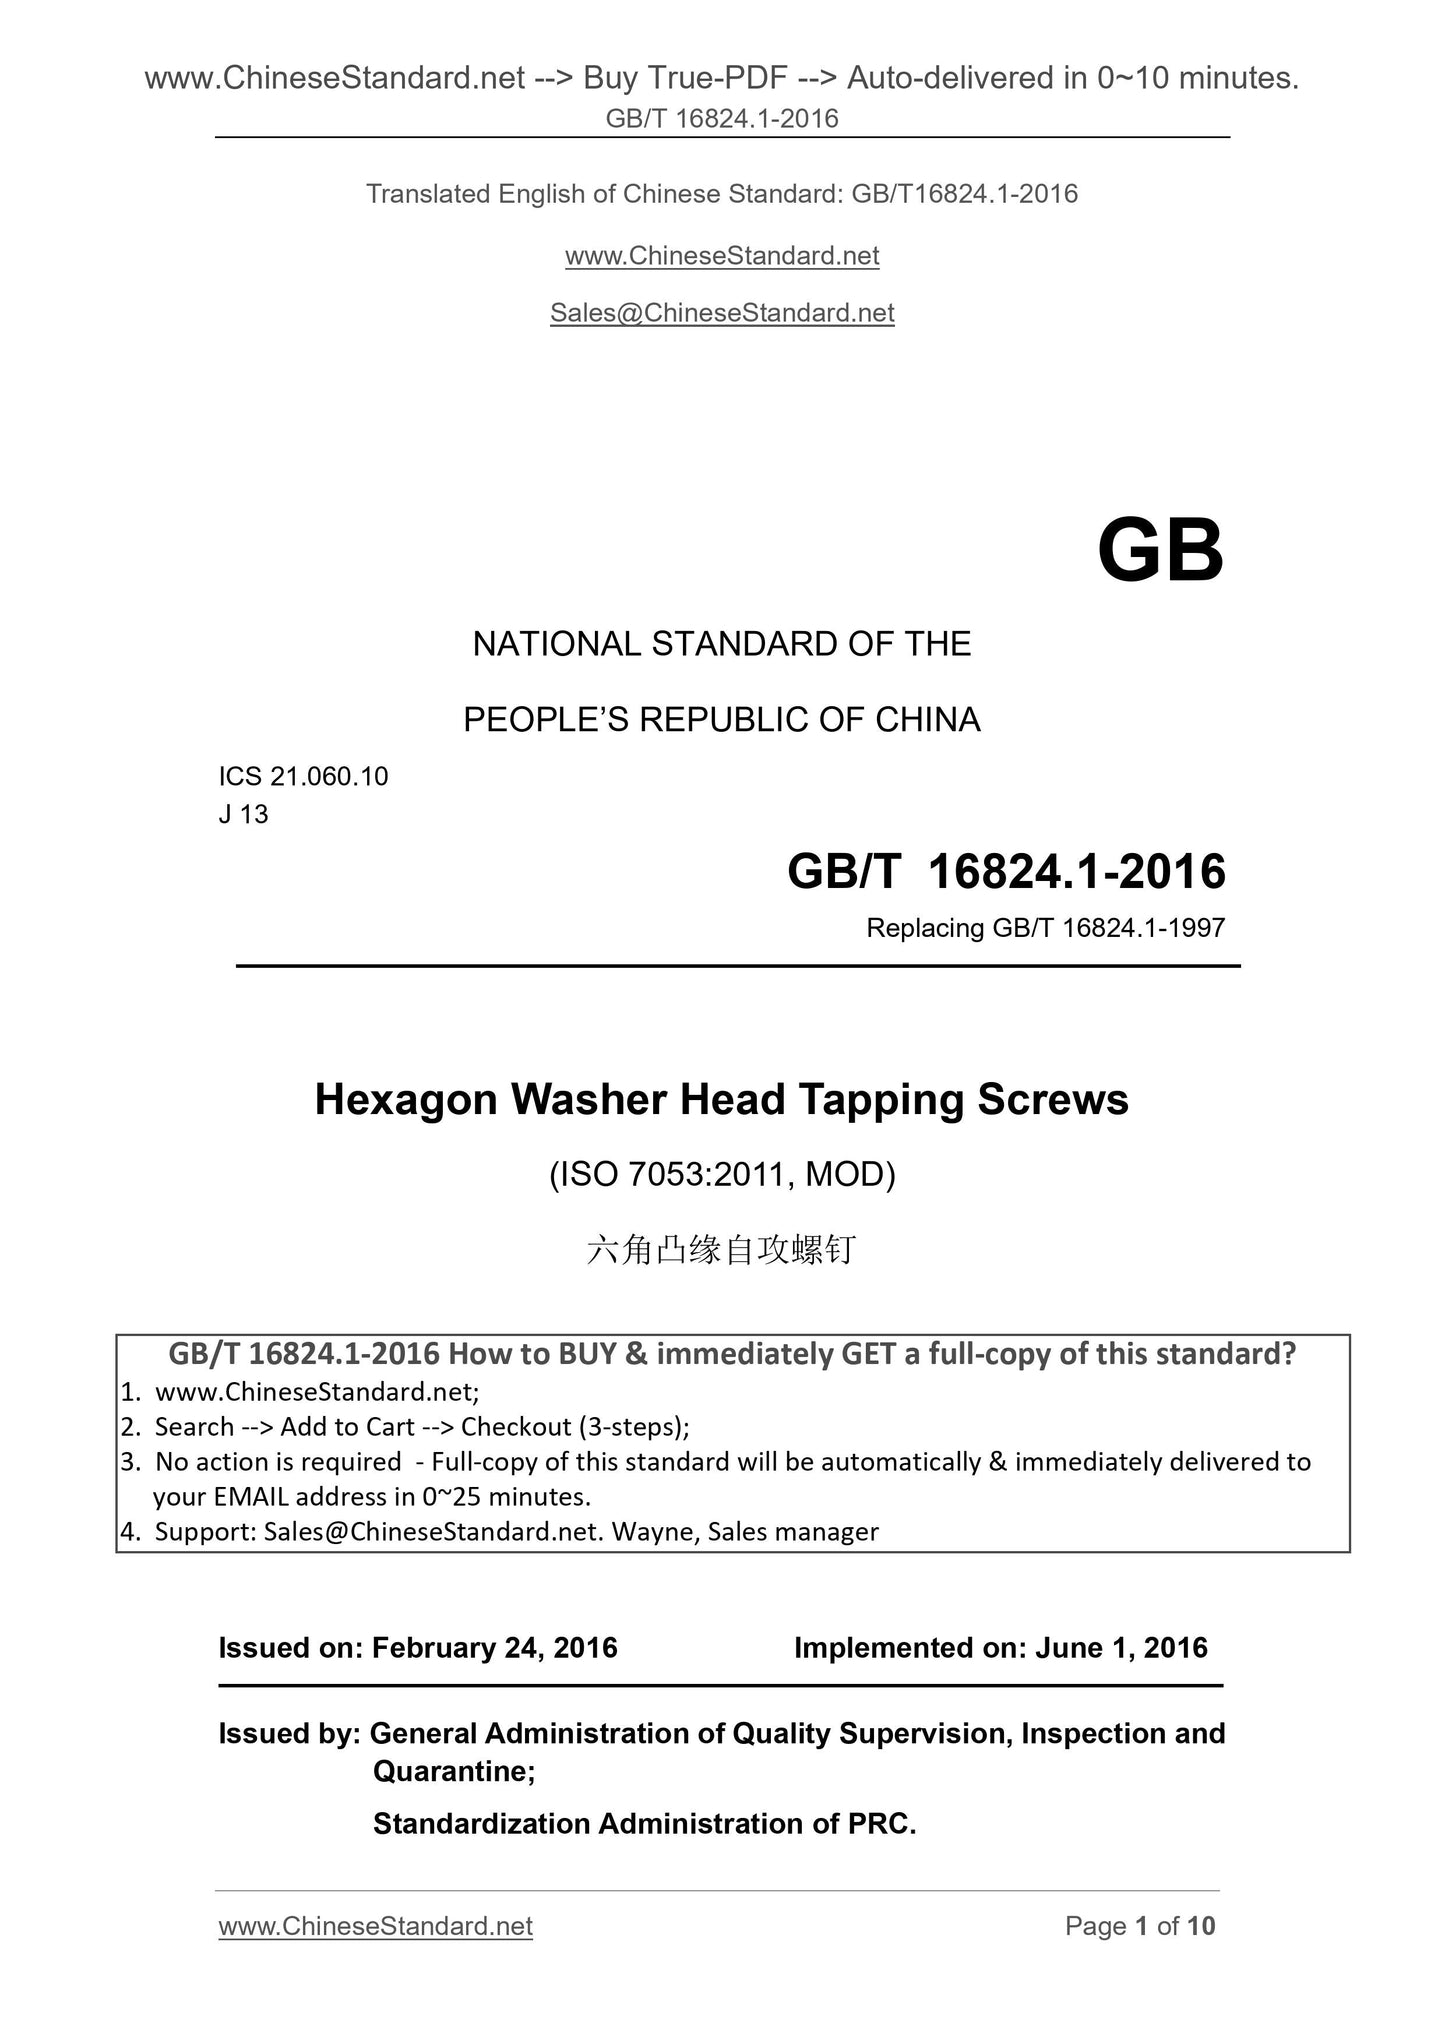 GB/T 16824.1-2016 Page 1